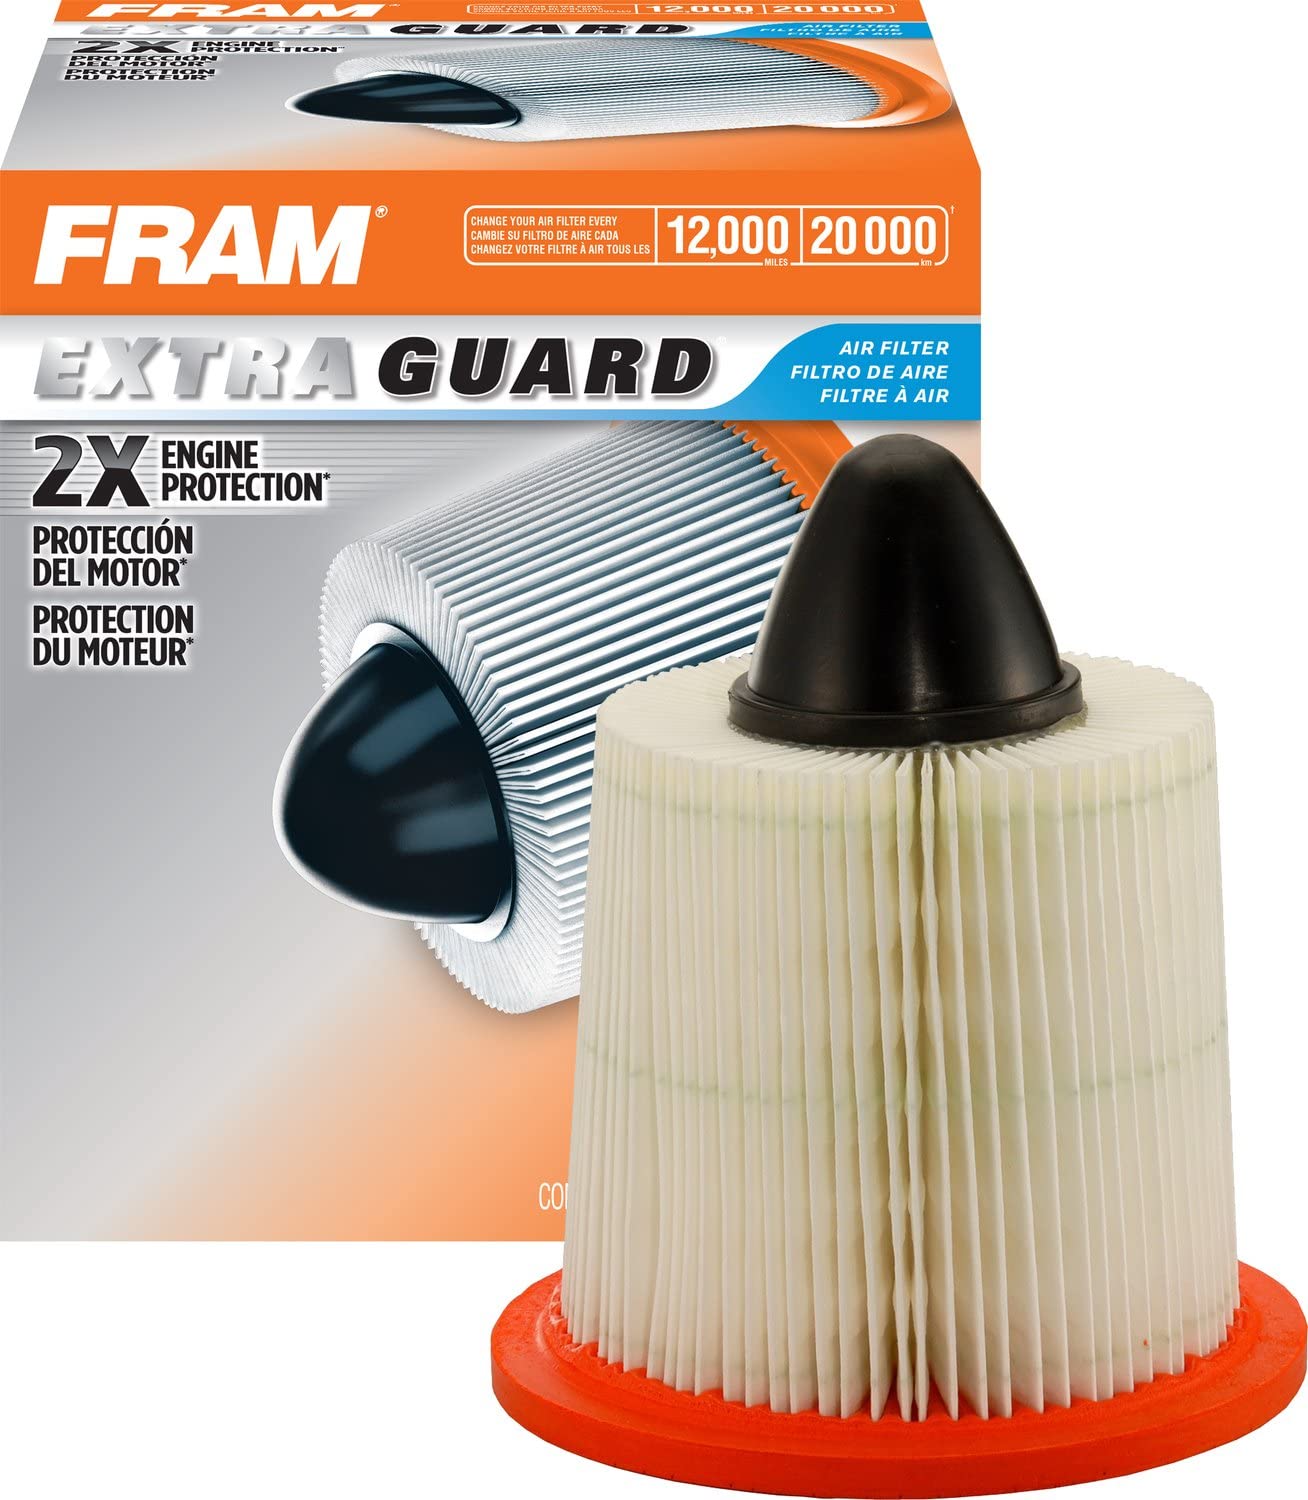 FRAM Extra Guard Air Filter, CA7774 for Select Ford and Mazda Vehicles